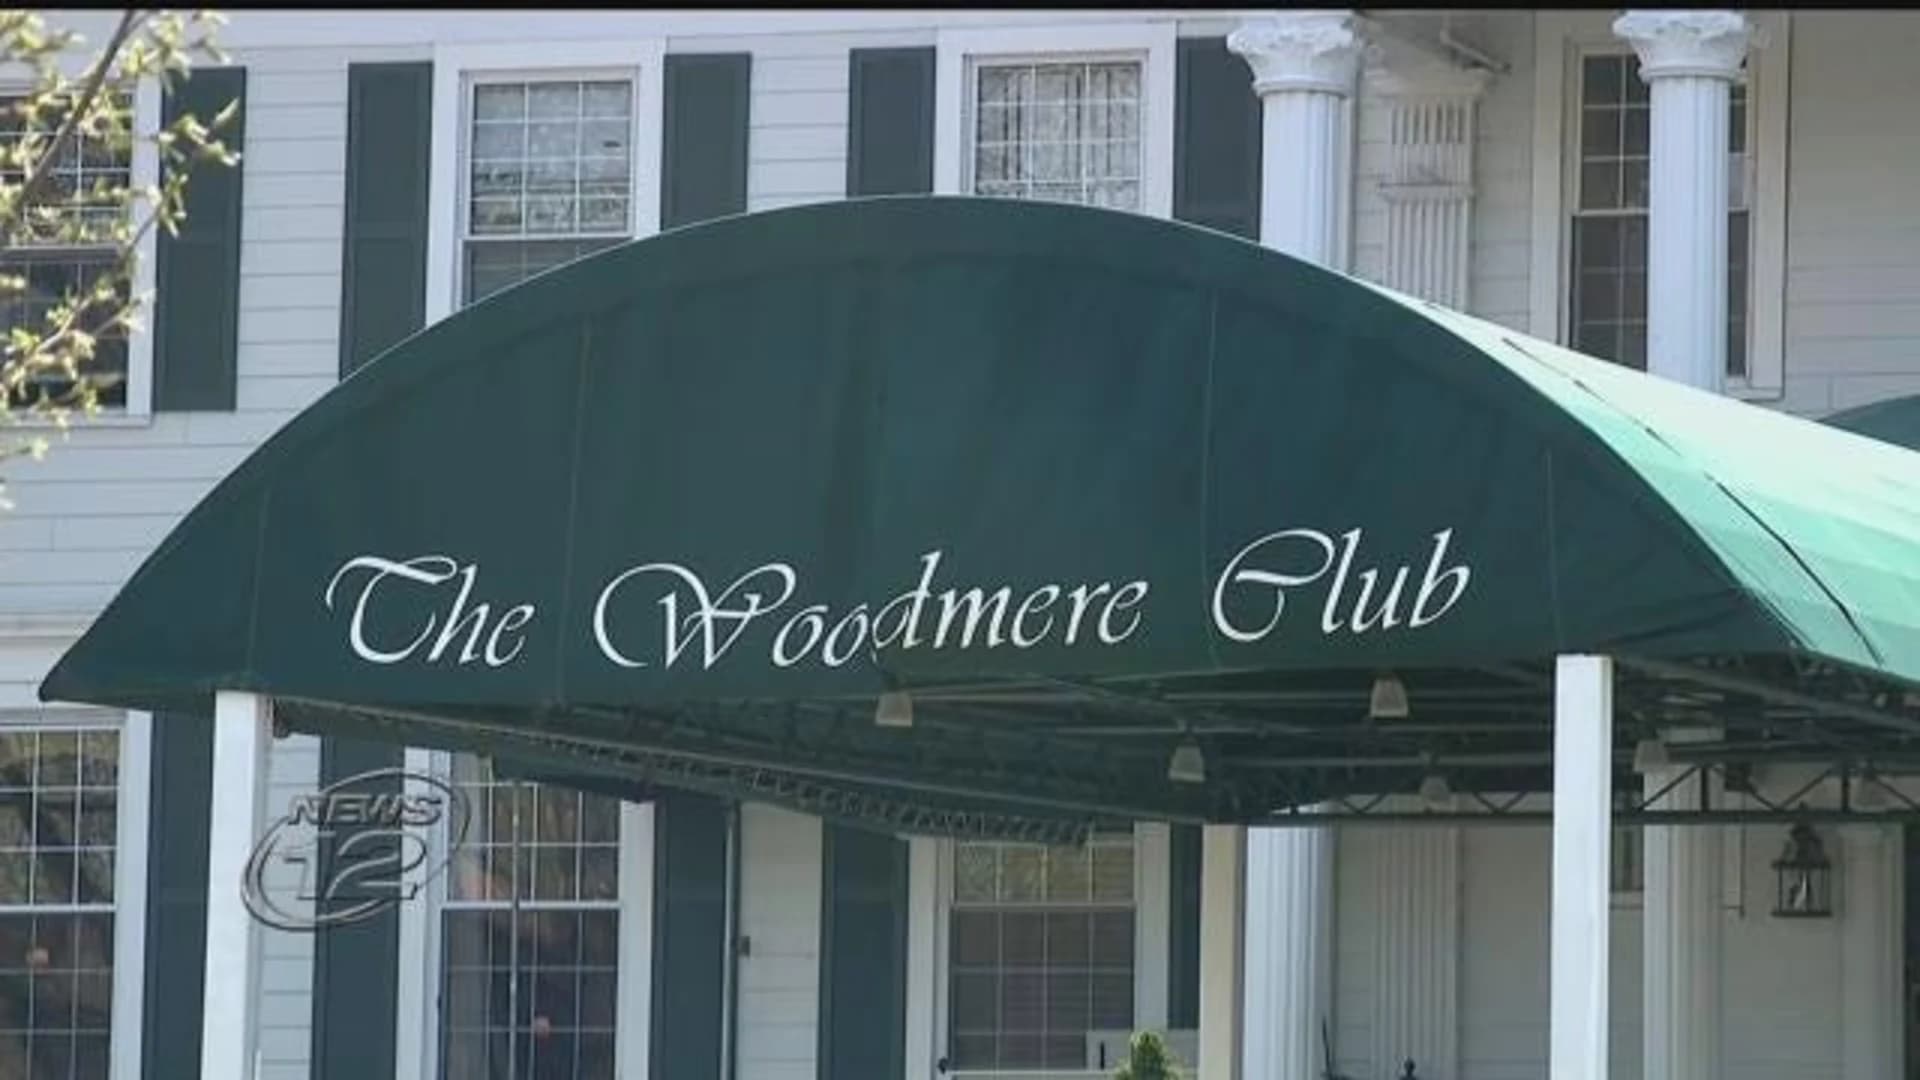 Plan to build homes at Woodmere golf course riles residents